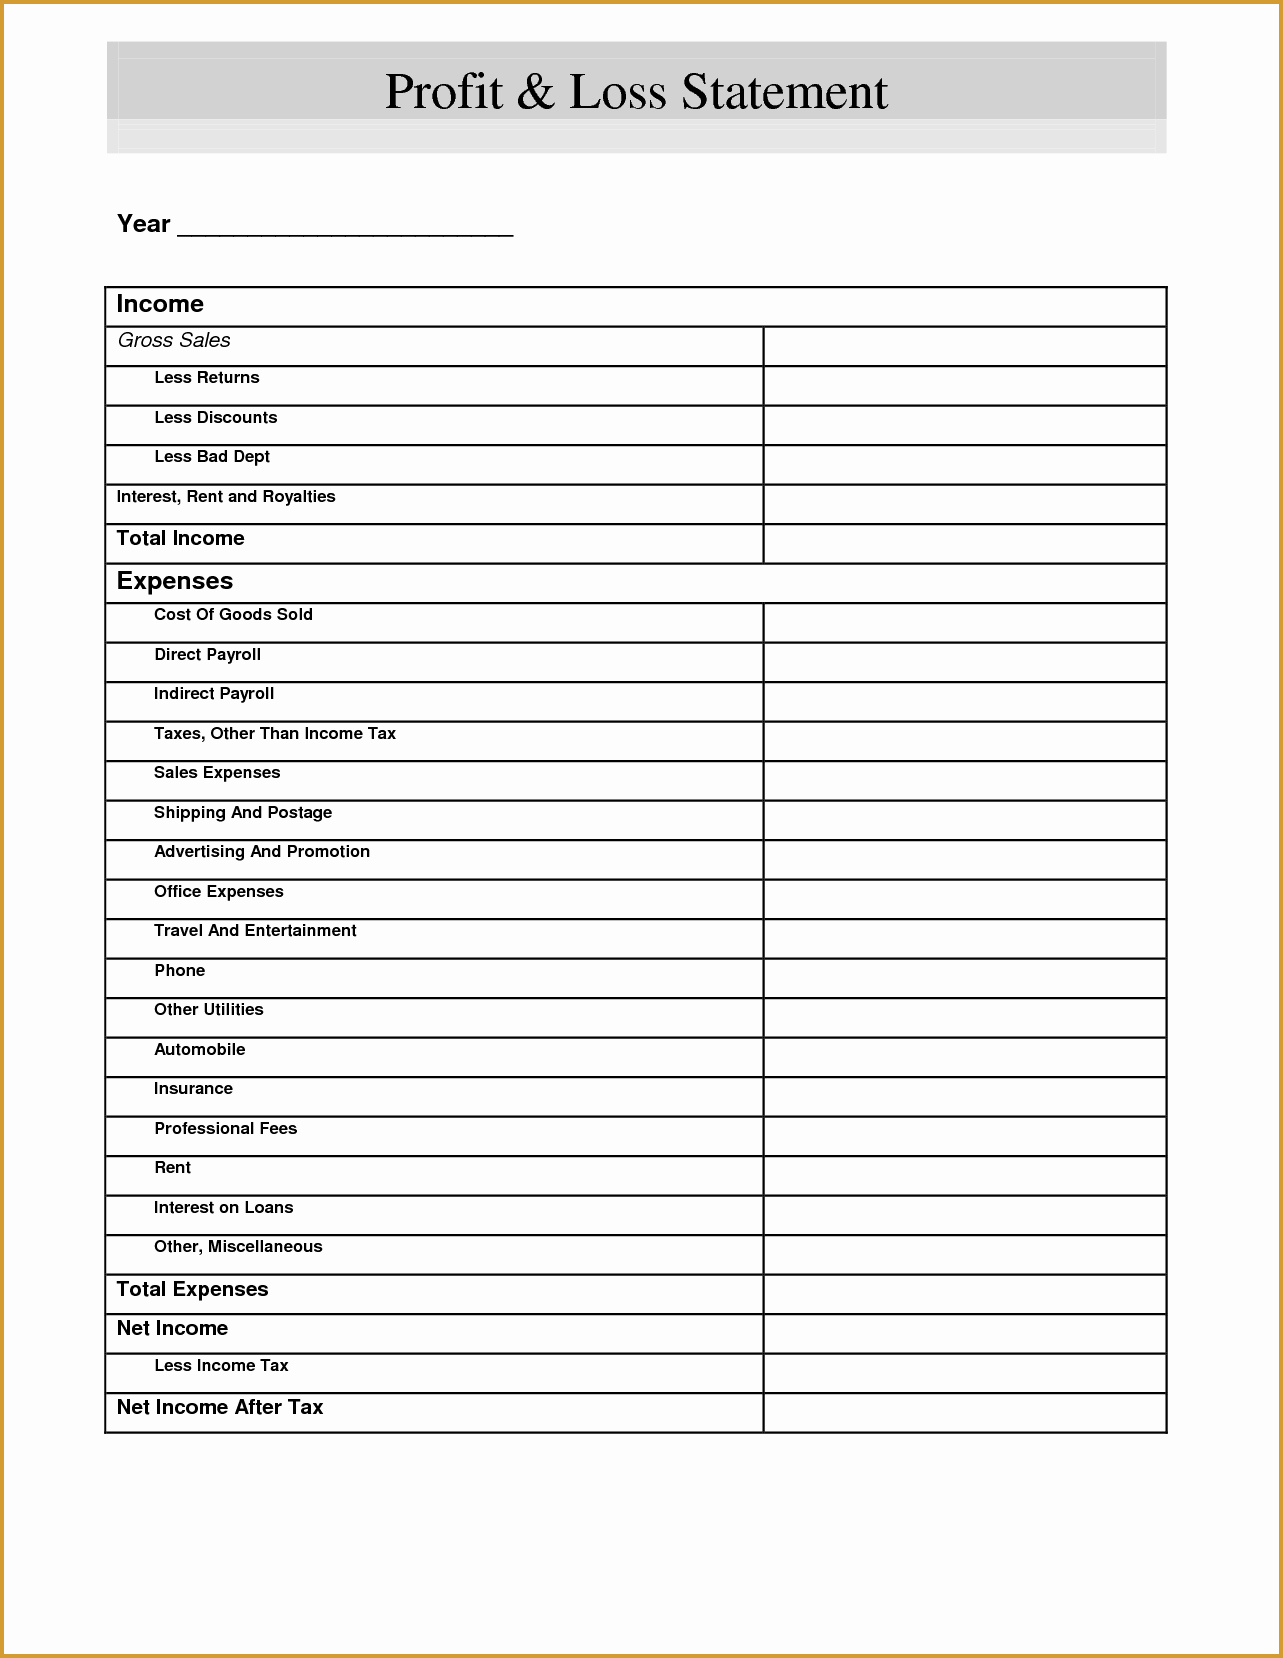 Free Profit and Loss Statement Best Of Free Profit and Loss Statement Template form